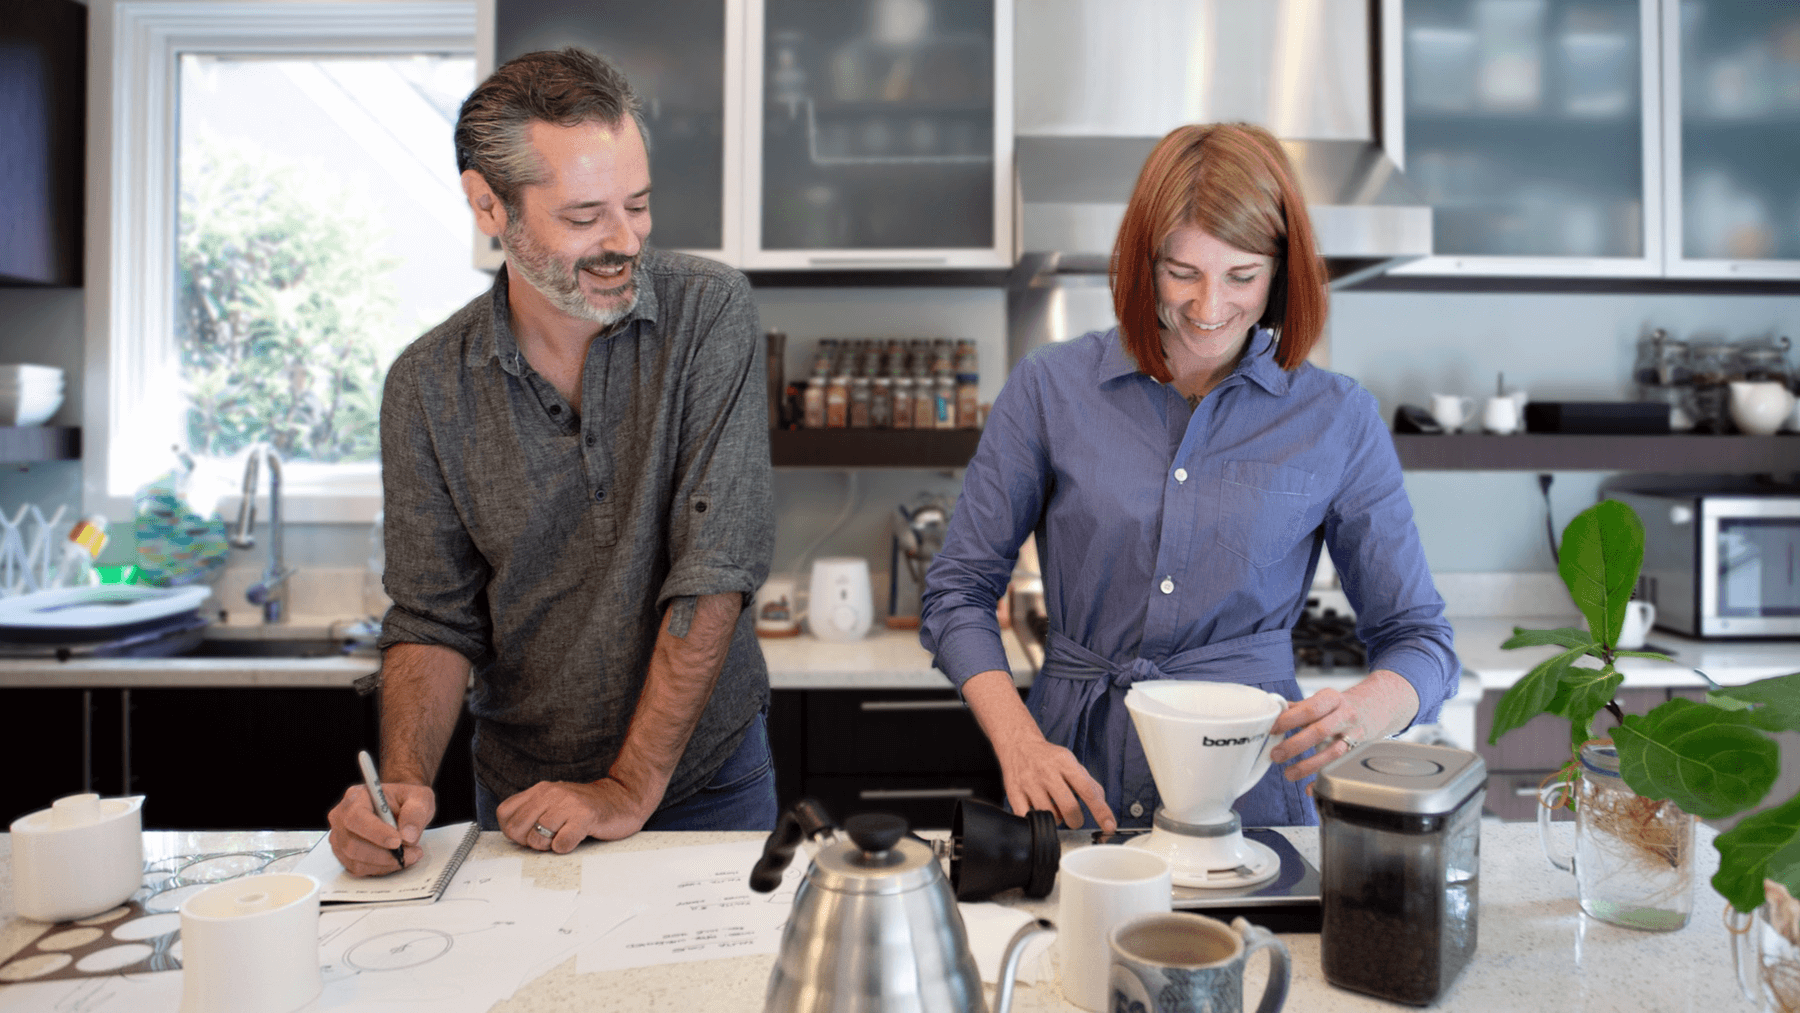 Two people standing in a kitchen, one of them is using the Stäk coffee maker